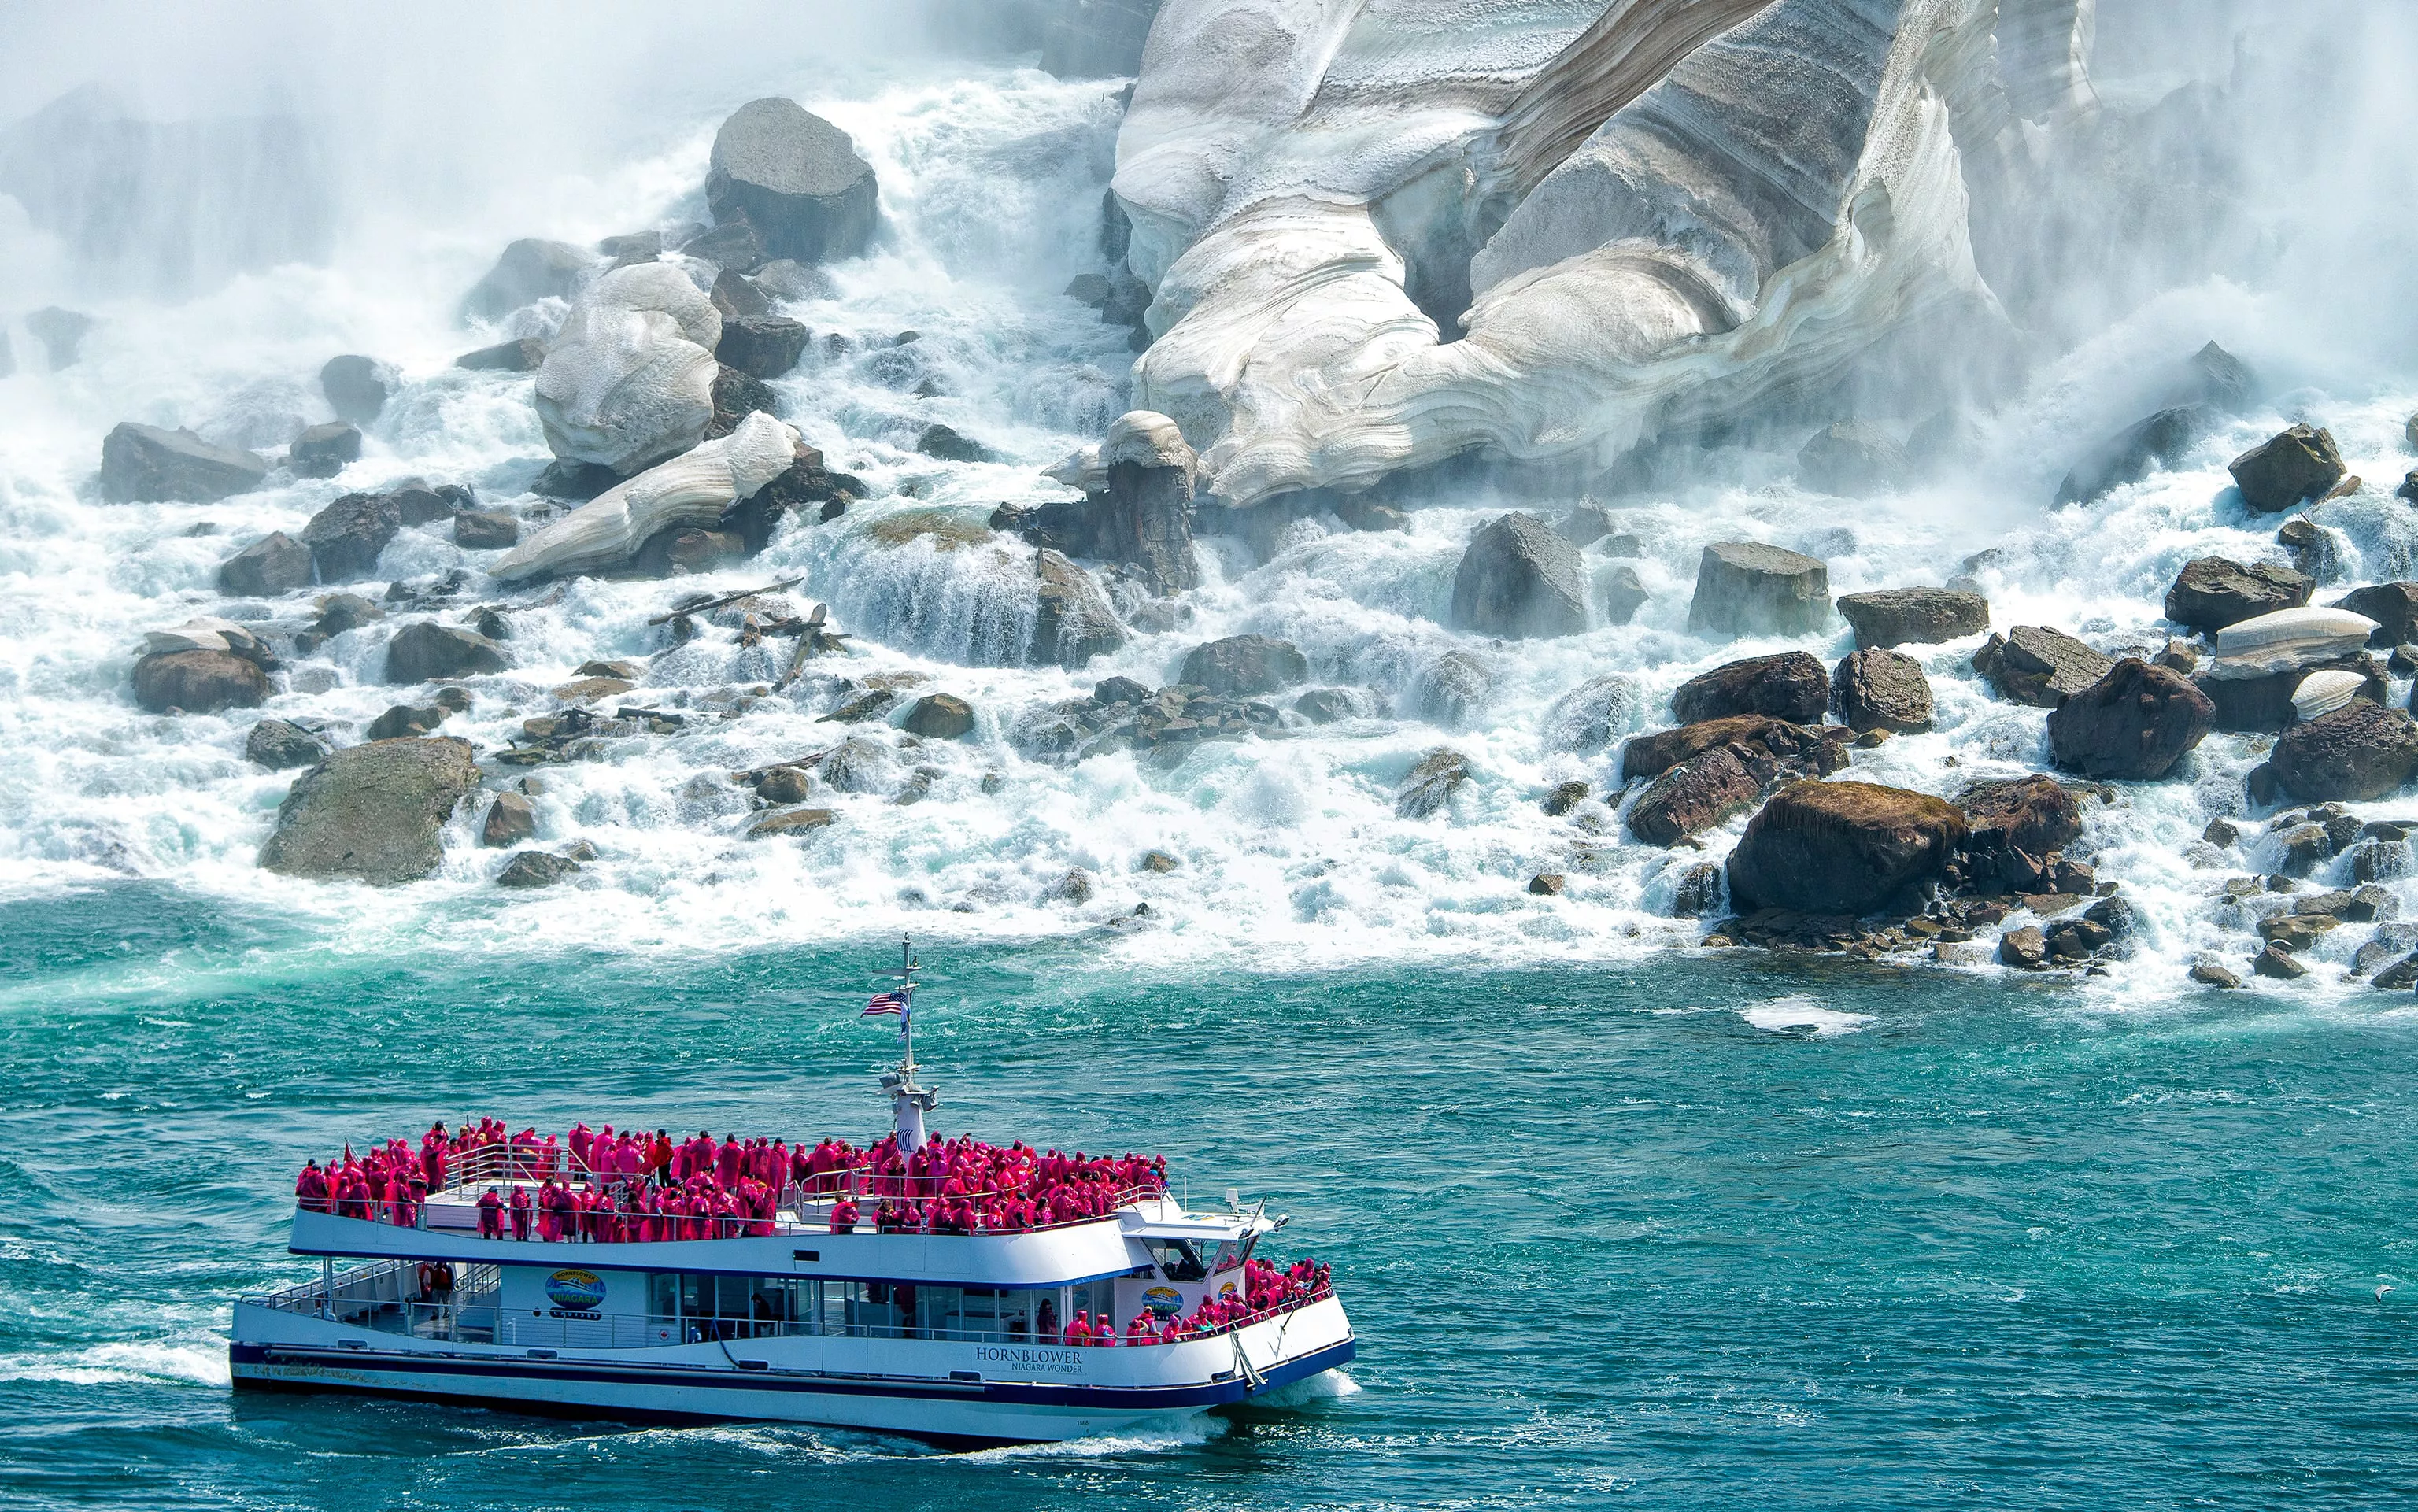 Hornblower Niagara Cruises in Canada, North America | Excursions - Rated 6.1